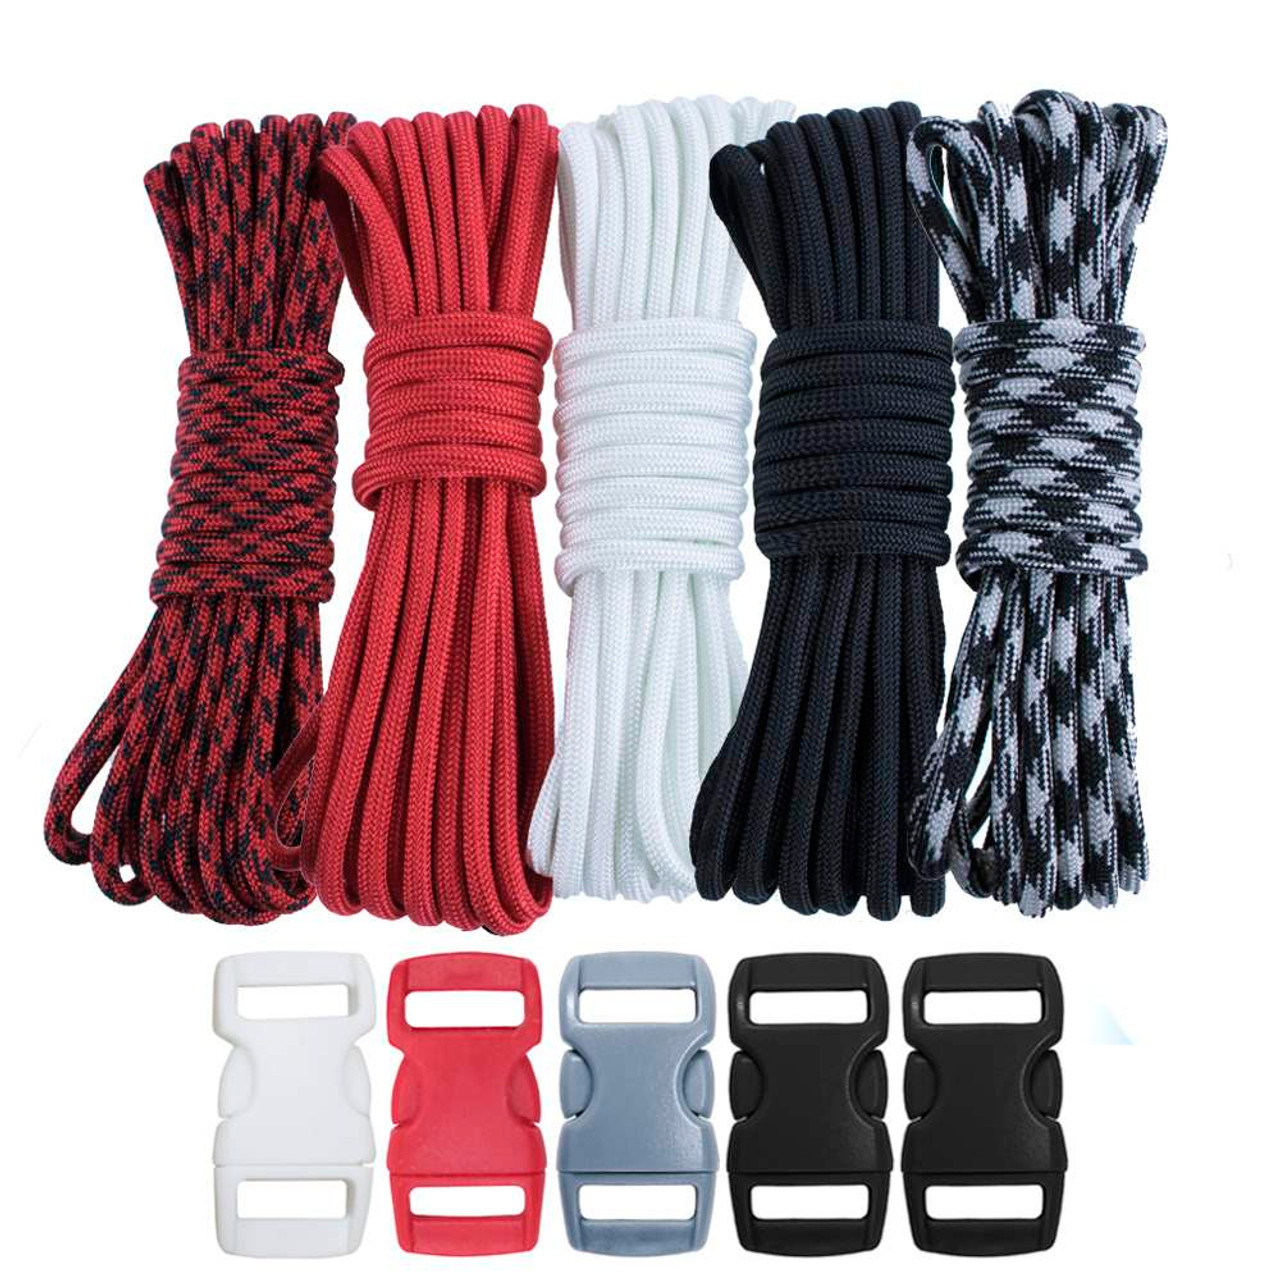 Surf's UP! - Combo Kit (Paracord & Buckles)